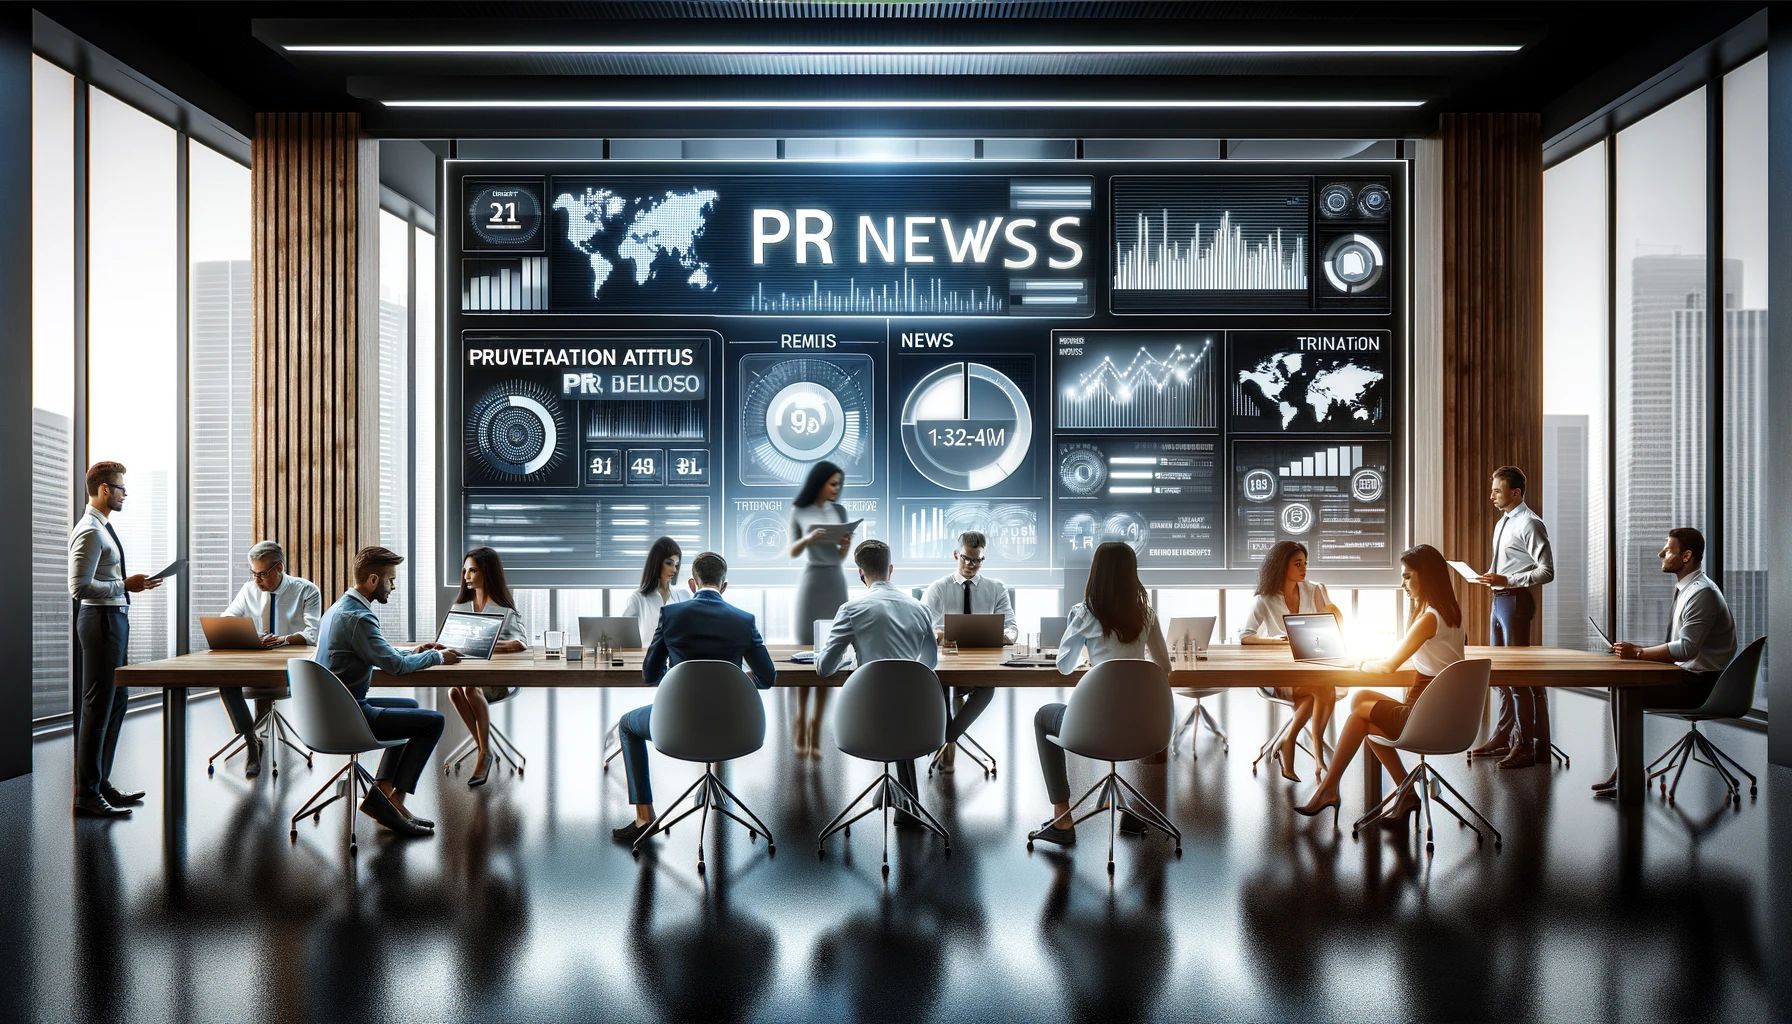 Professionals discussing the latest PR news updates in a modern office with digital screens showing trending topics and social media analytics.